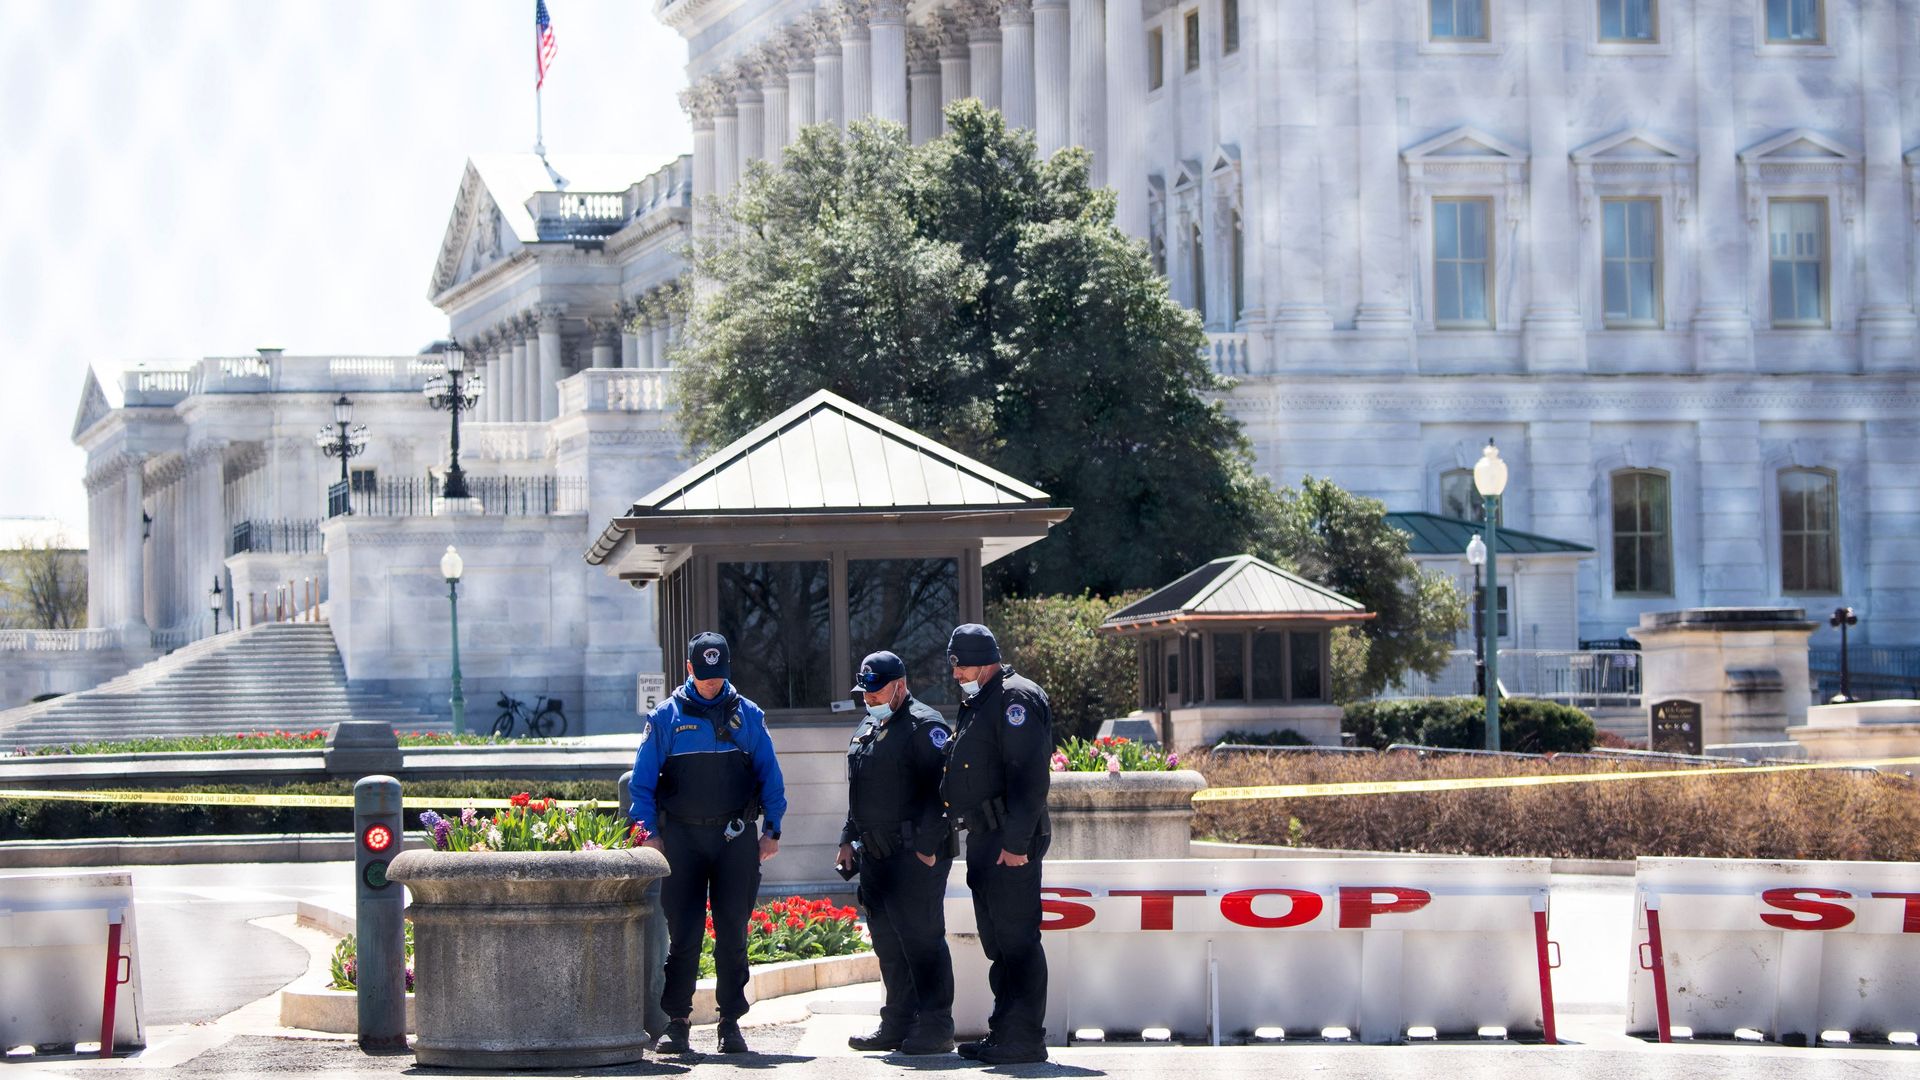 Three Capitol police officers stand in front of the complex, with the U.S. flag at half-mast in the background